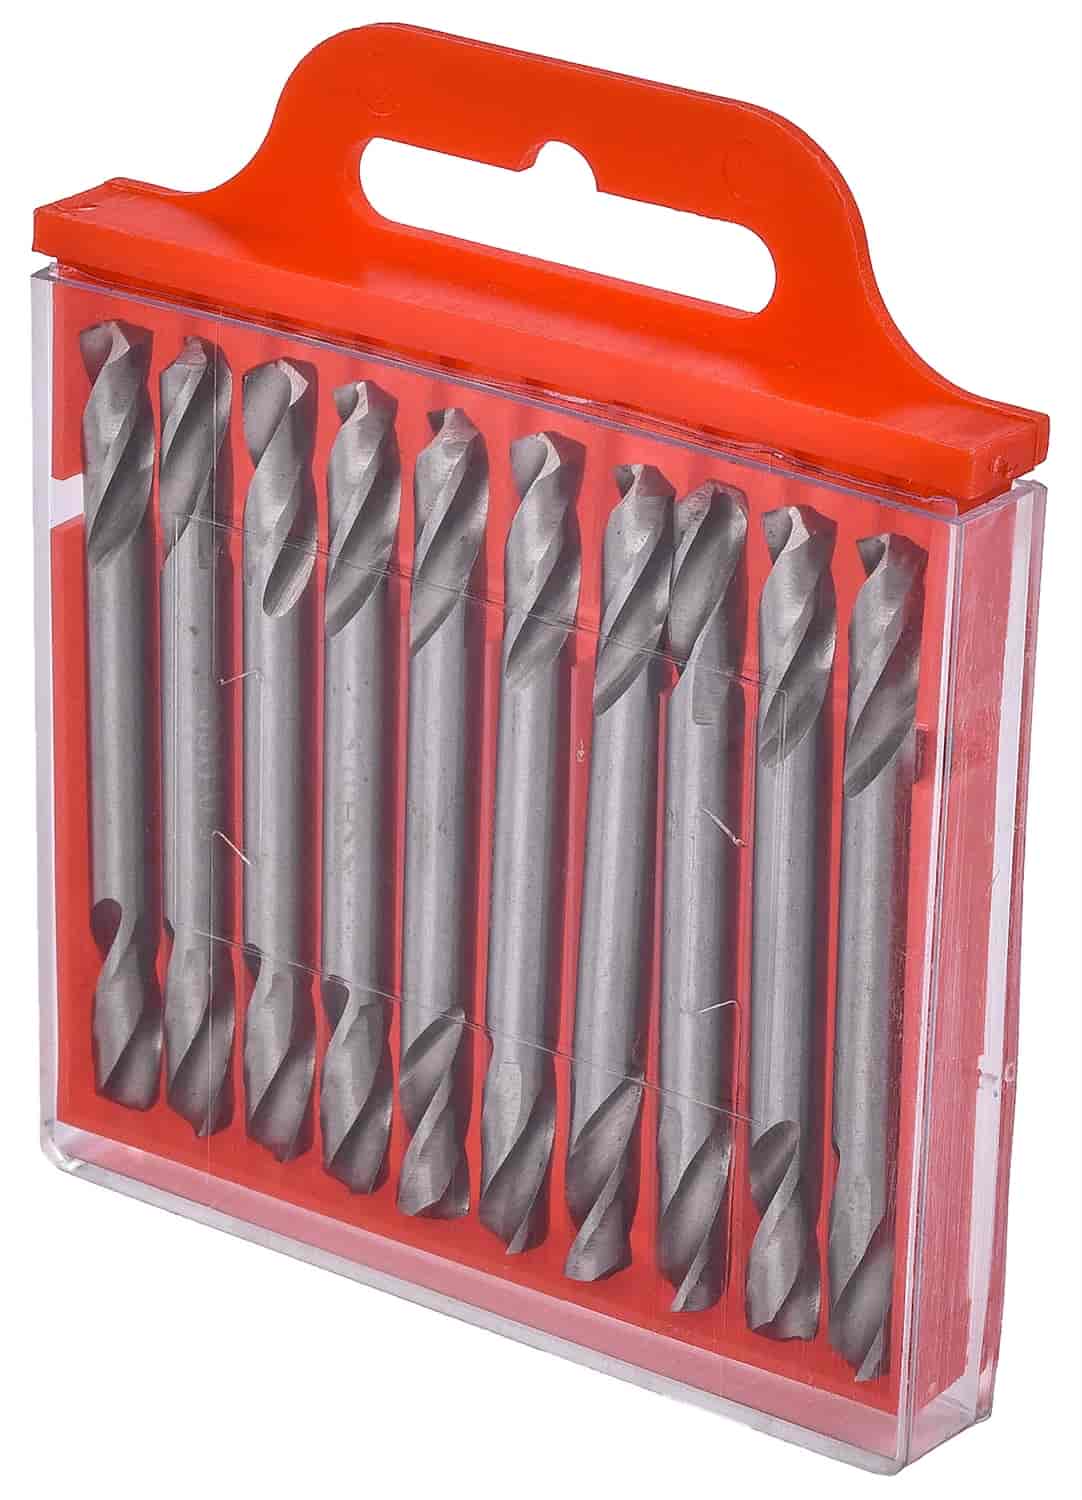 10-piece Double-Ended Drill Bit Set [3/16 in. Drive]